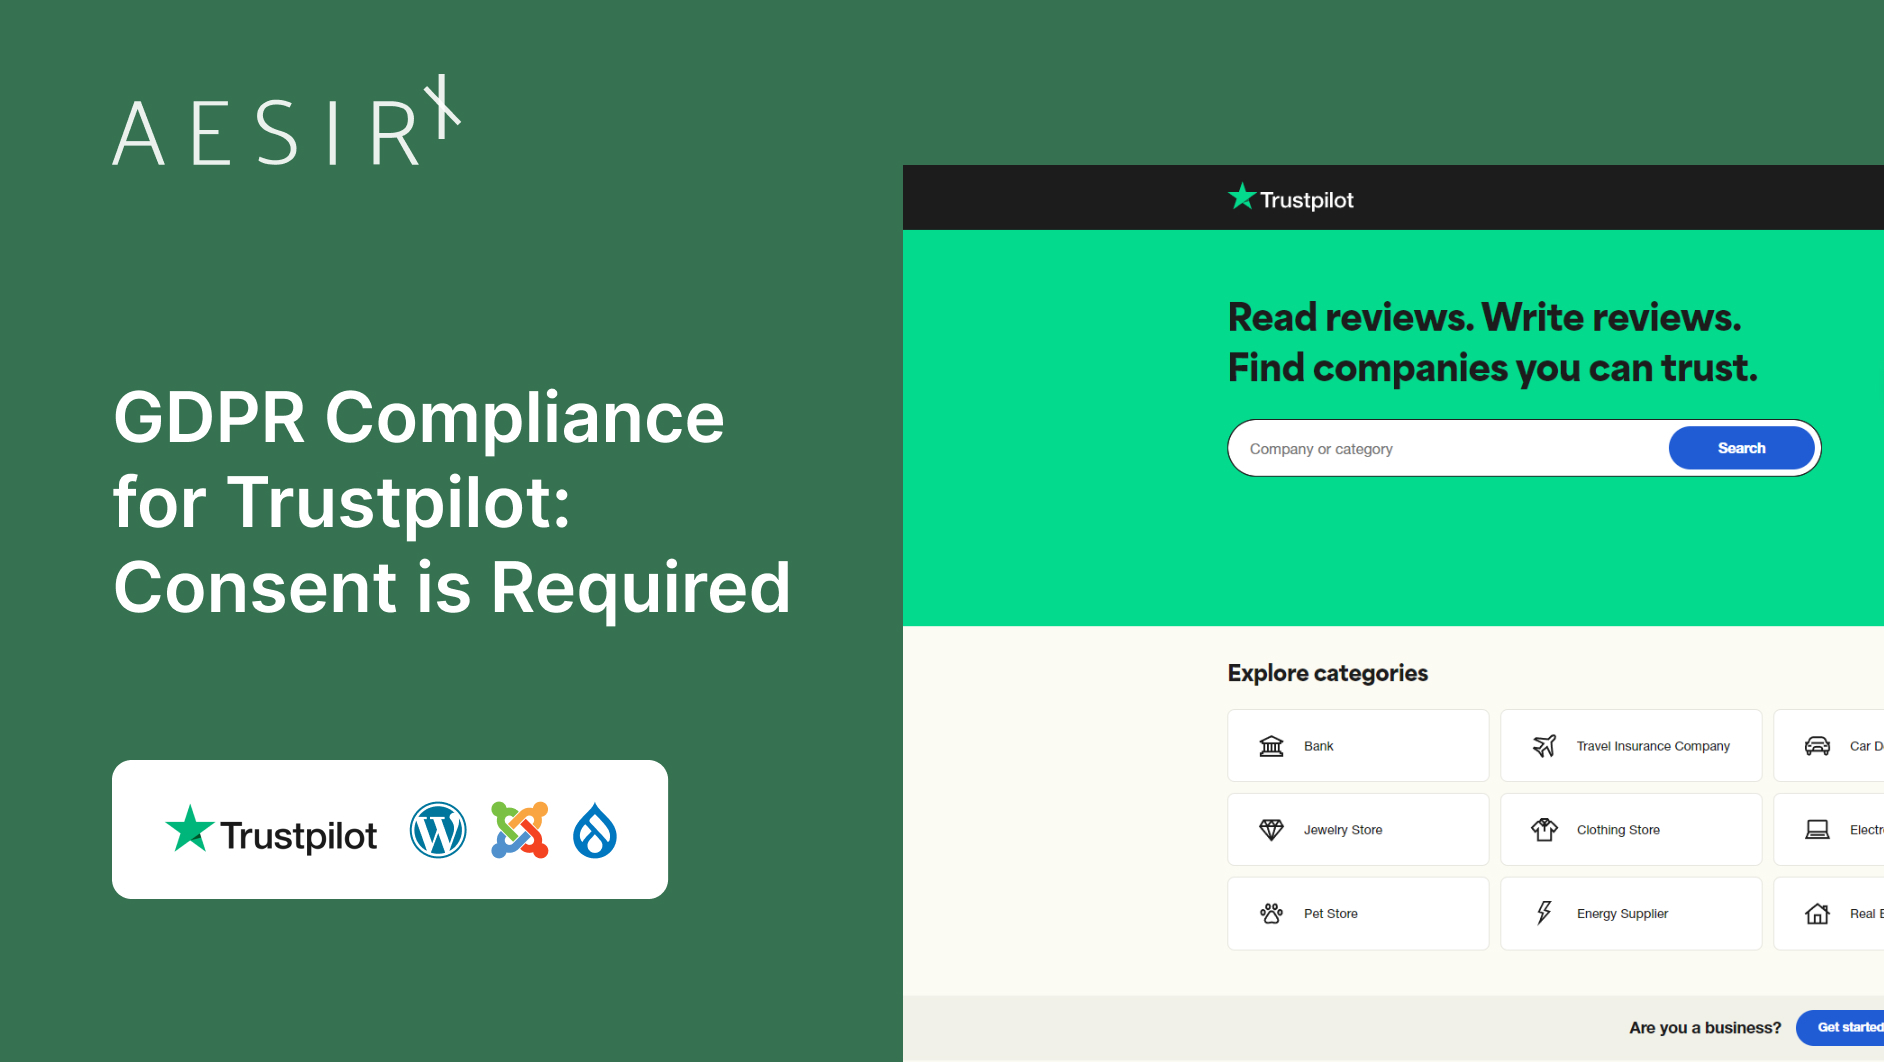 GDPR Compliance for Trustpilot: Consent is Required